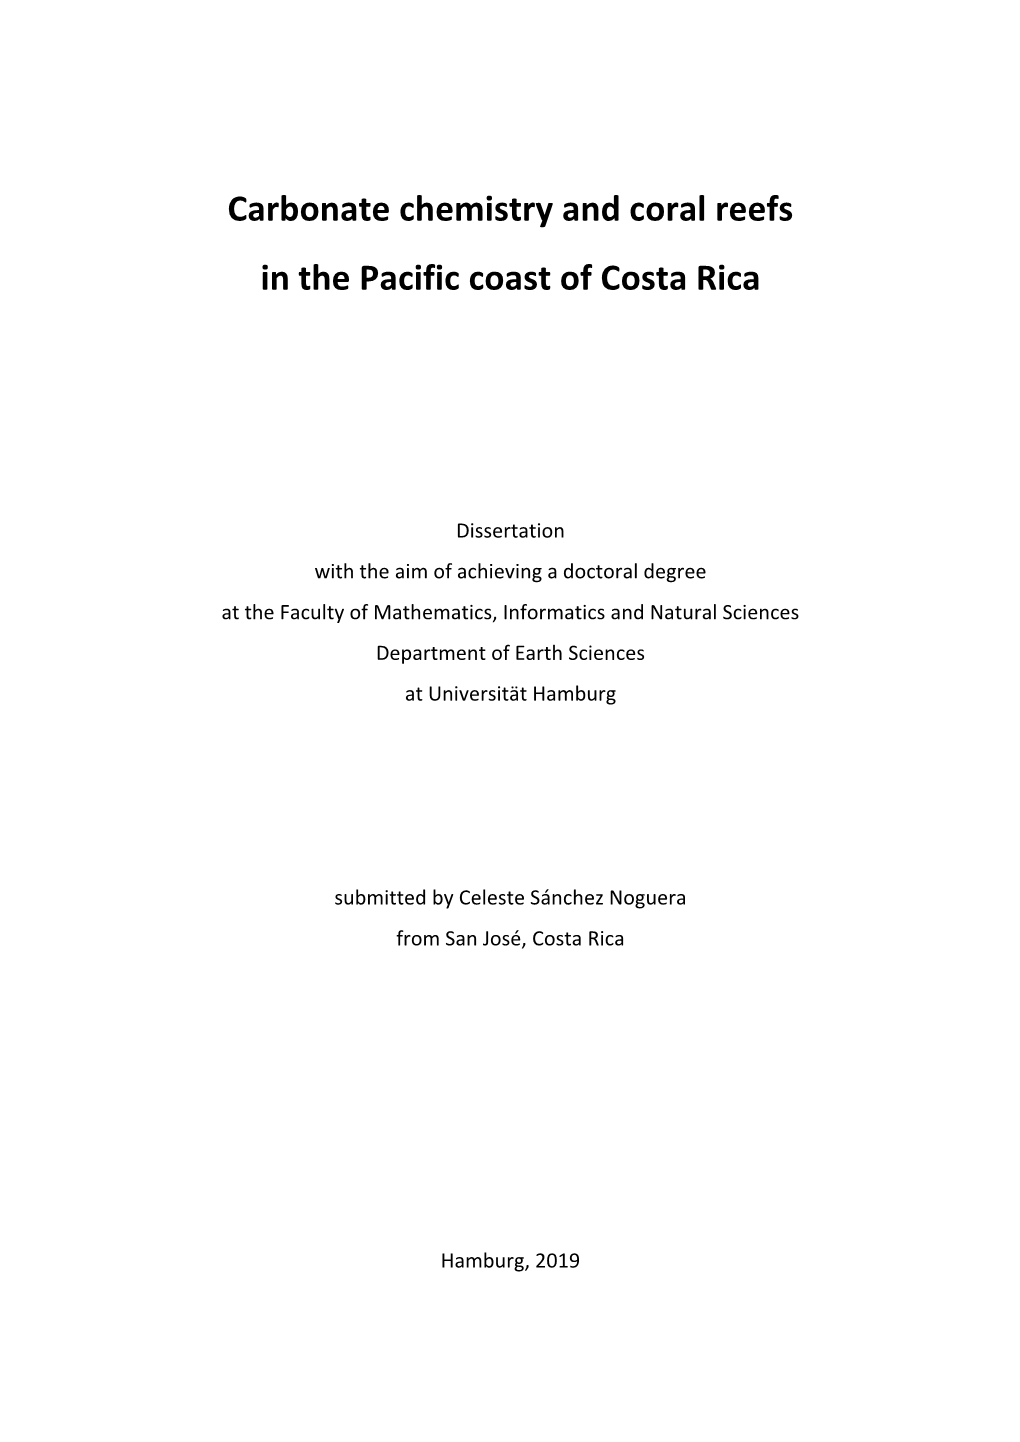 Carbonate Chemistry and Coral Reefs in the Pacific Coast of Costa Rica